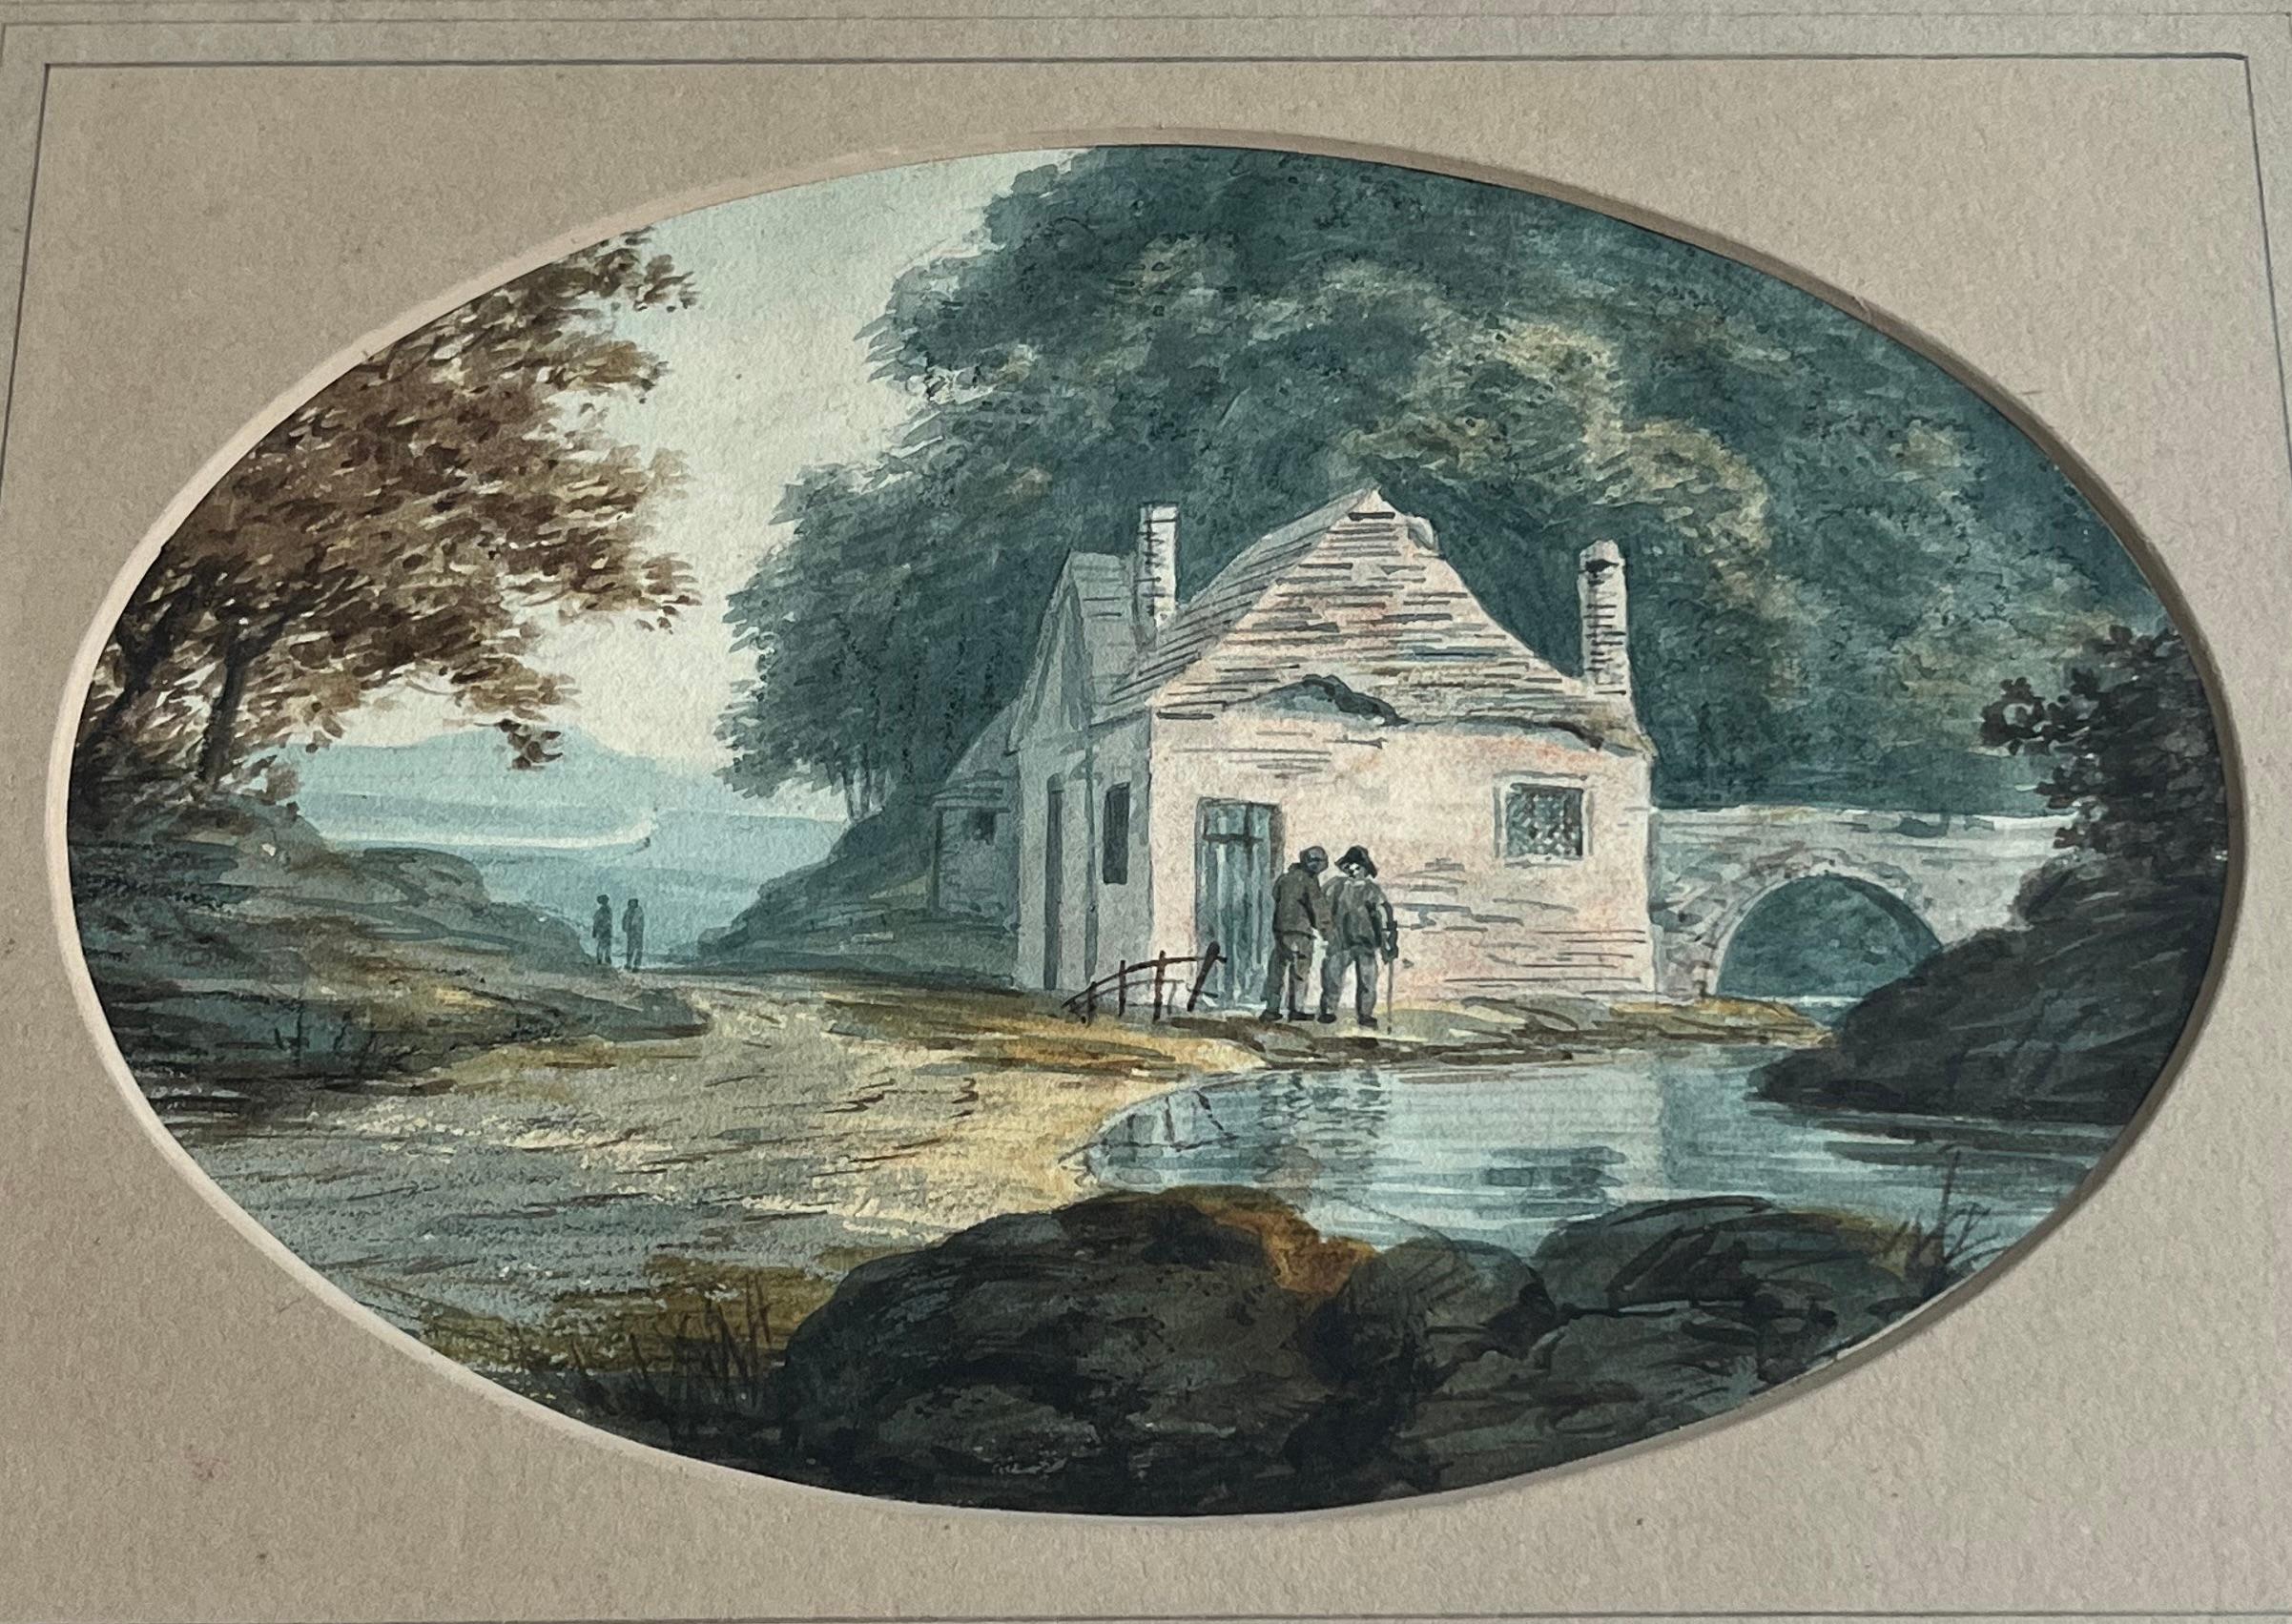 Early English watercolour, Figures chatting by a cottage near a river - English School Art by William Payne